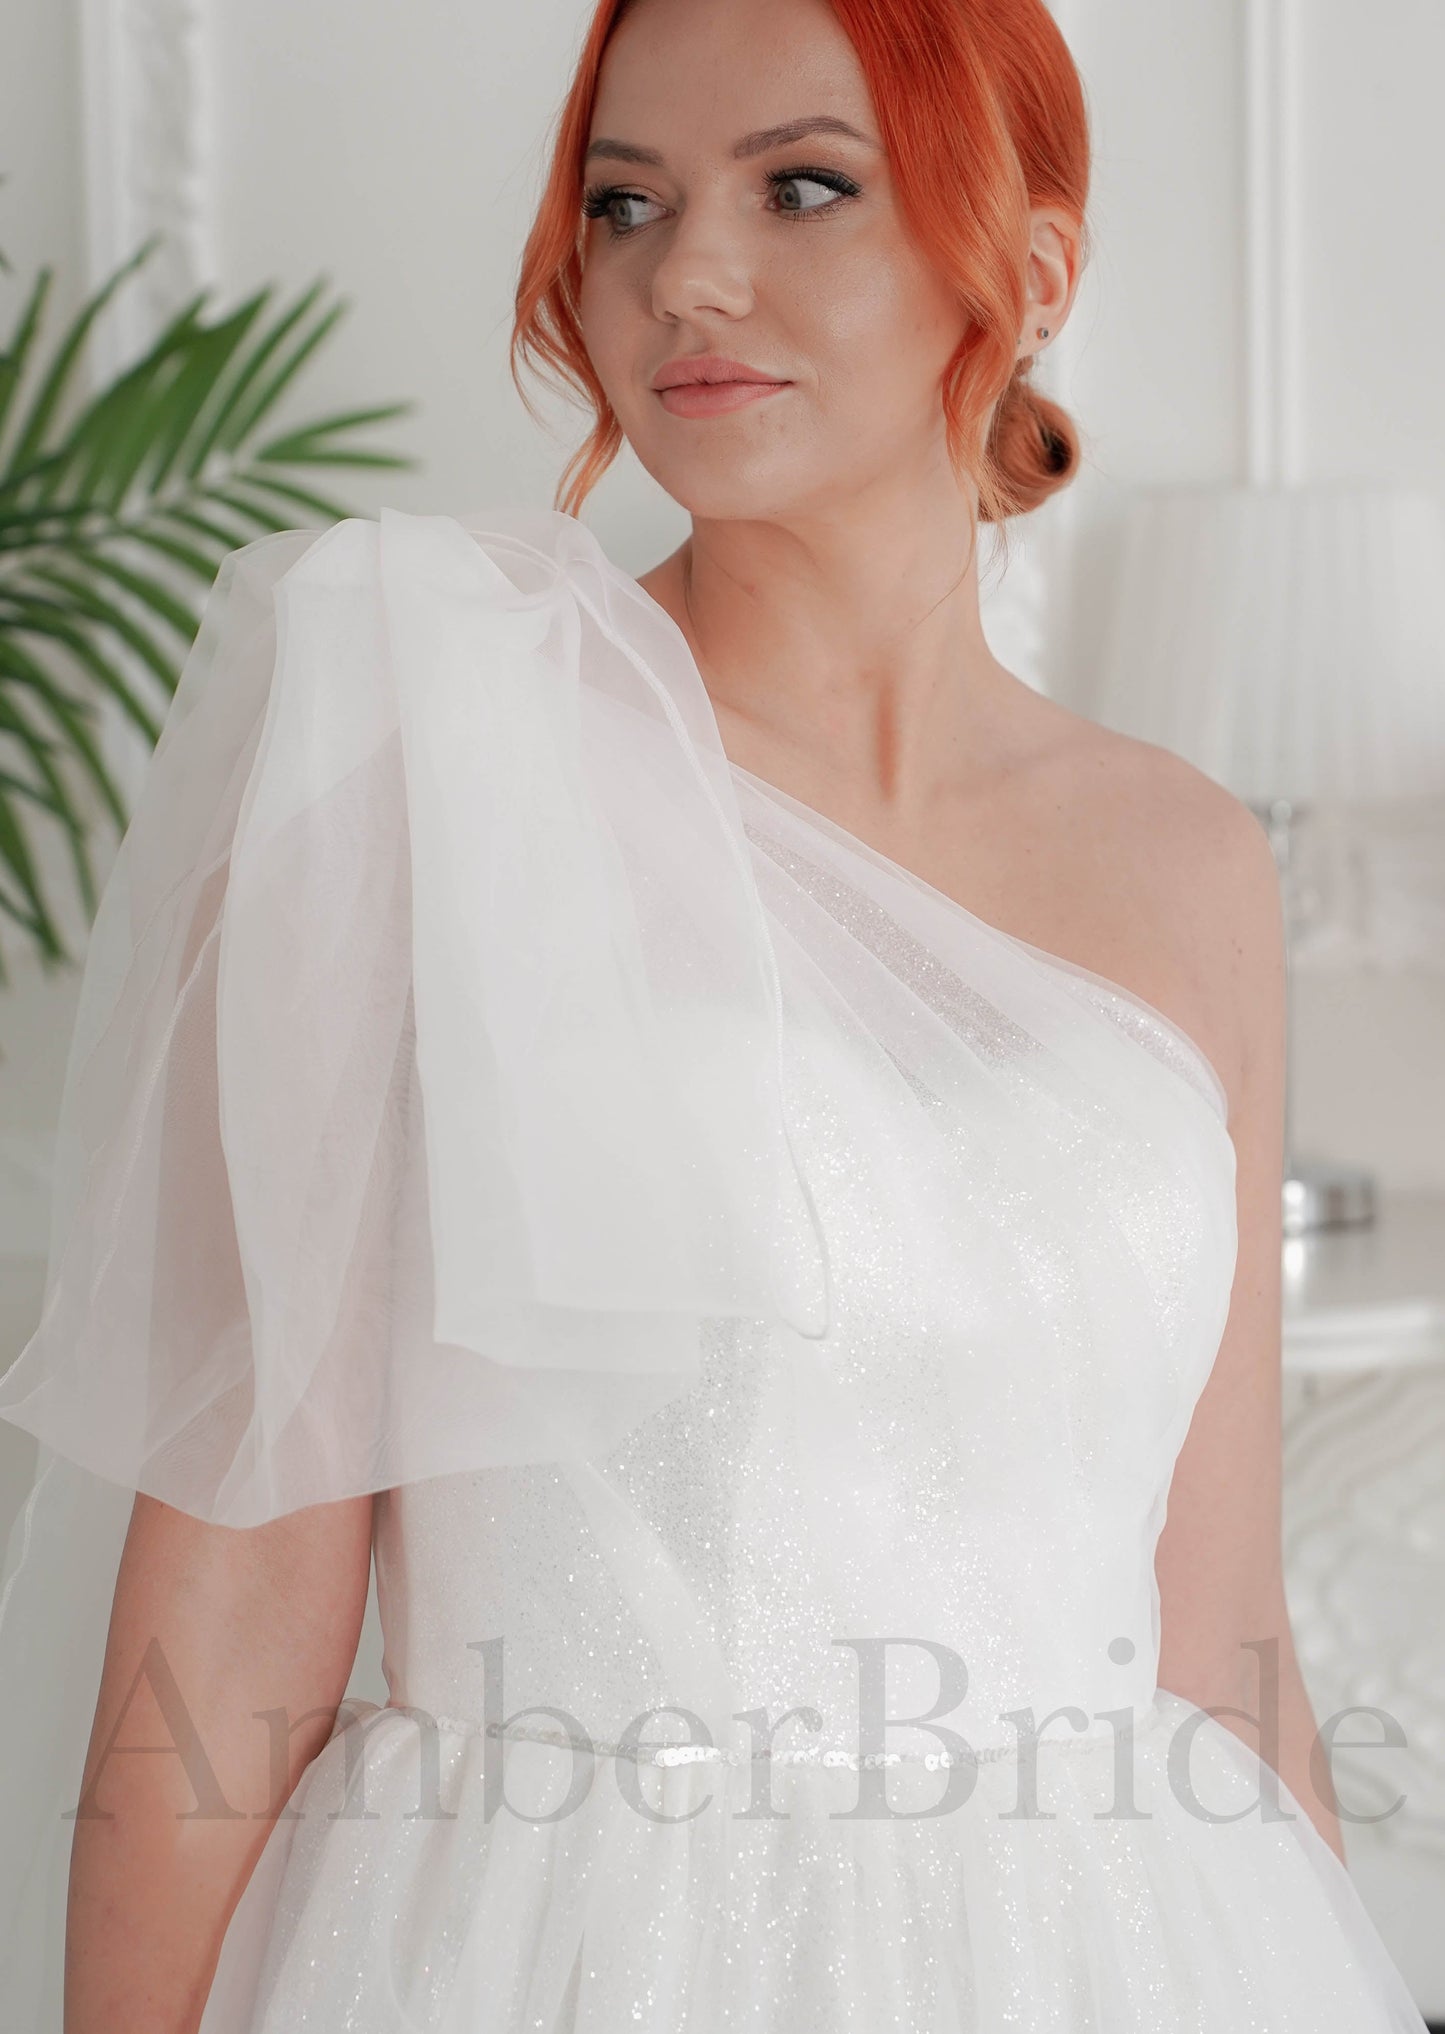 Asymmetrical A Line Sequin Organza Wedding Dress with One Shoulder Bow